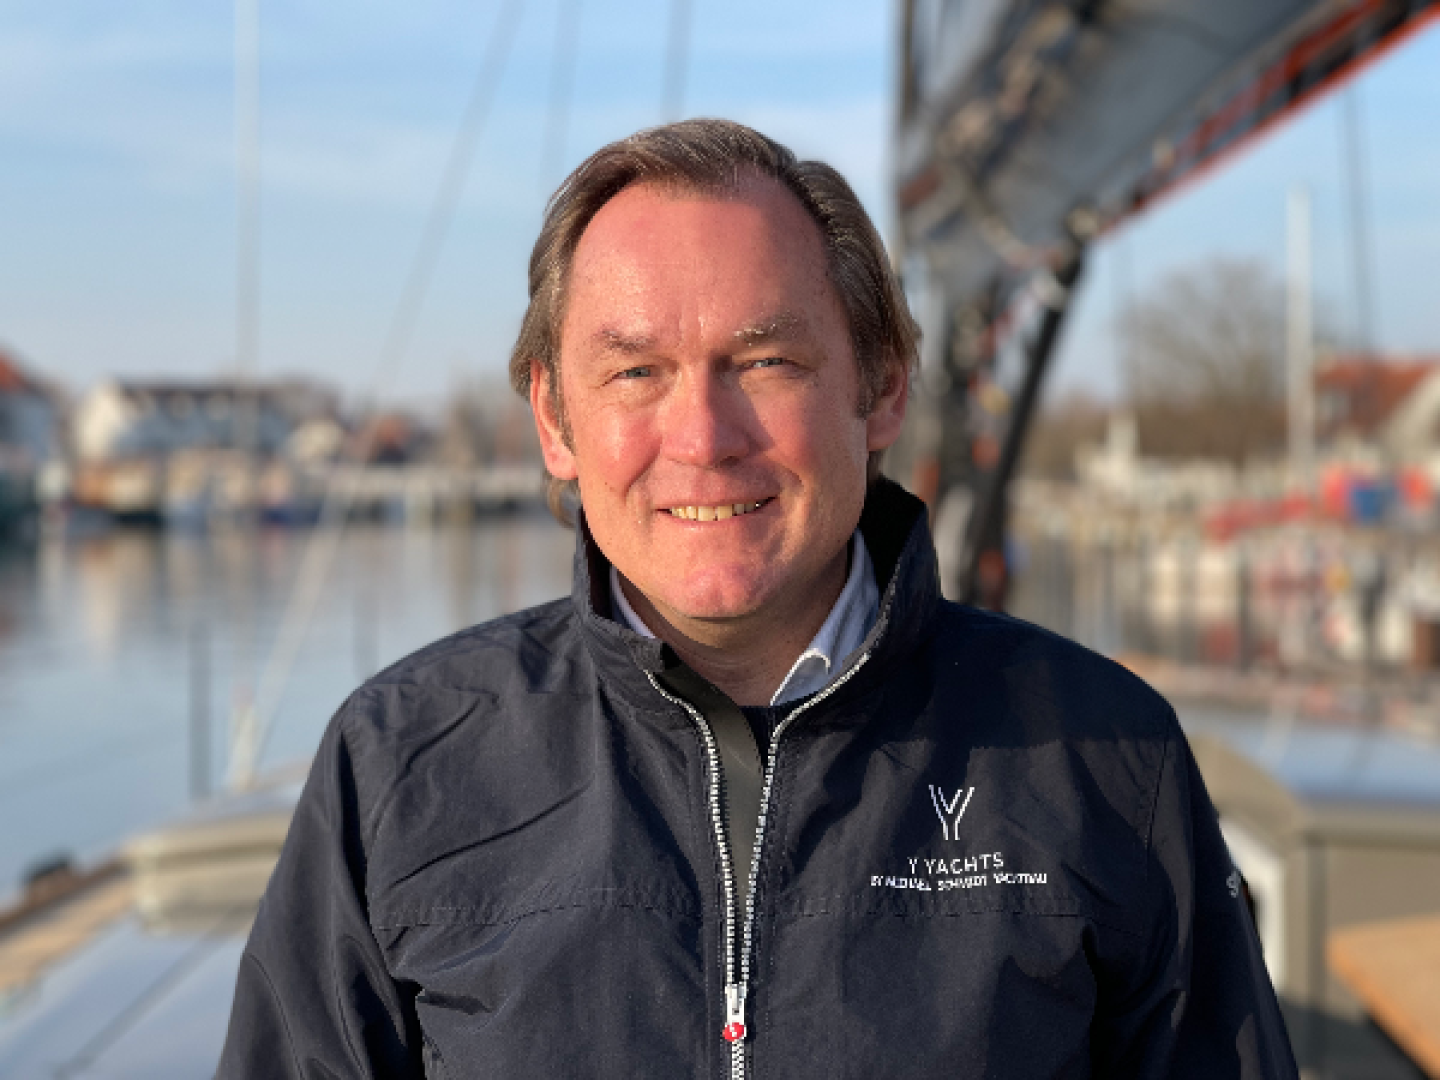 YYachts the appointment of Christian Möller from Hamburg